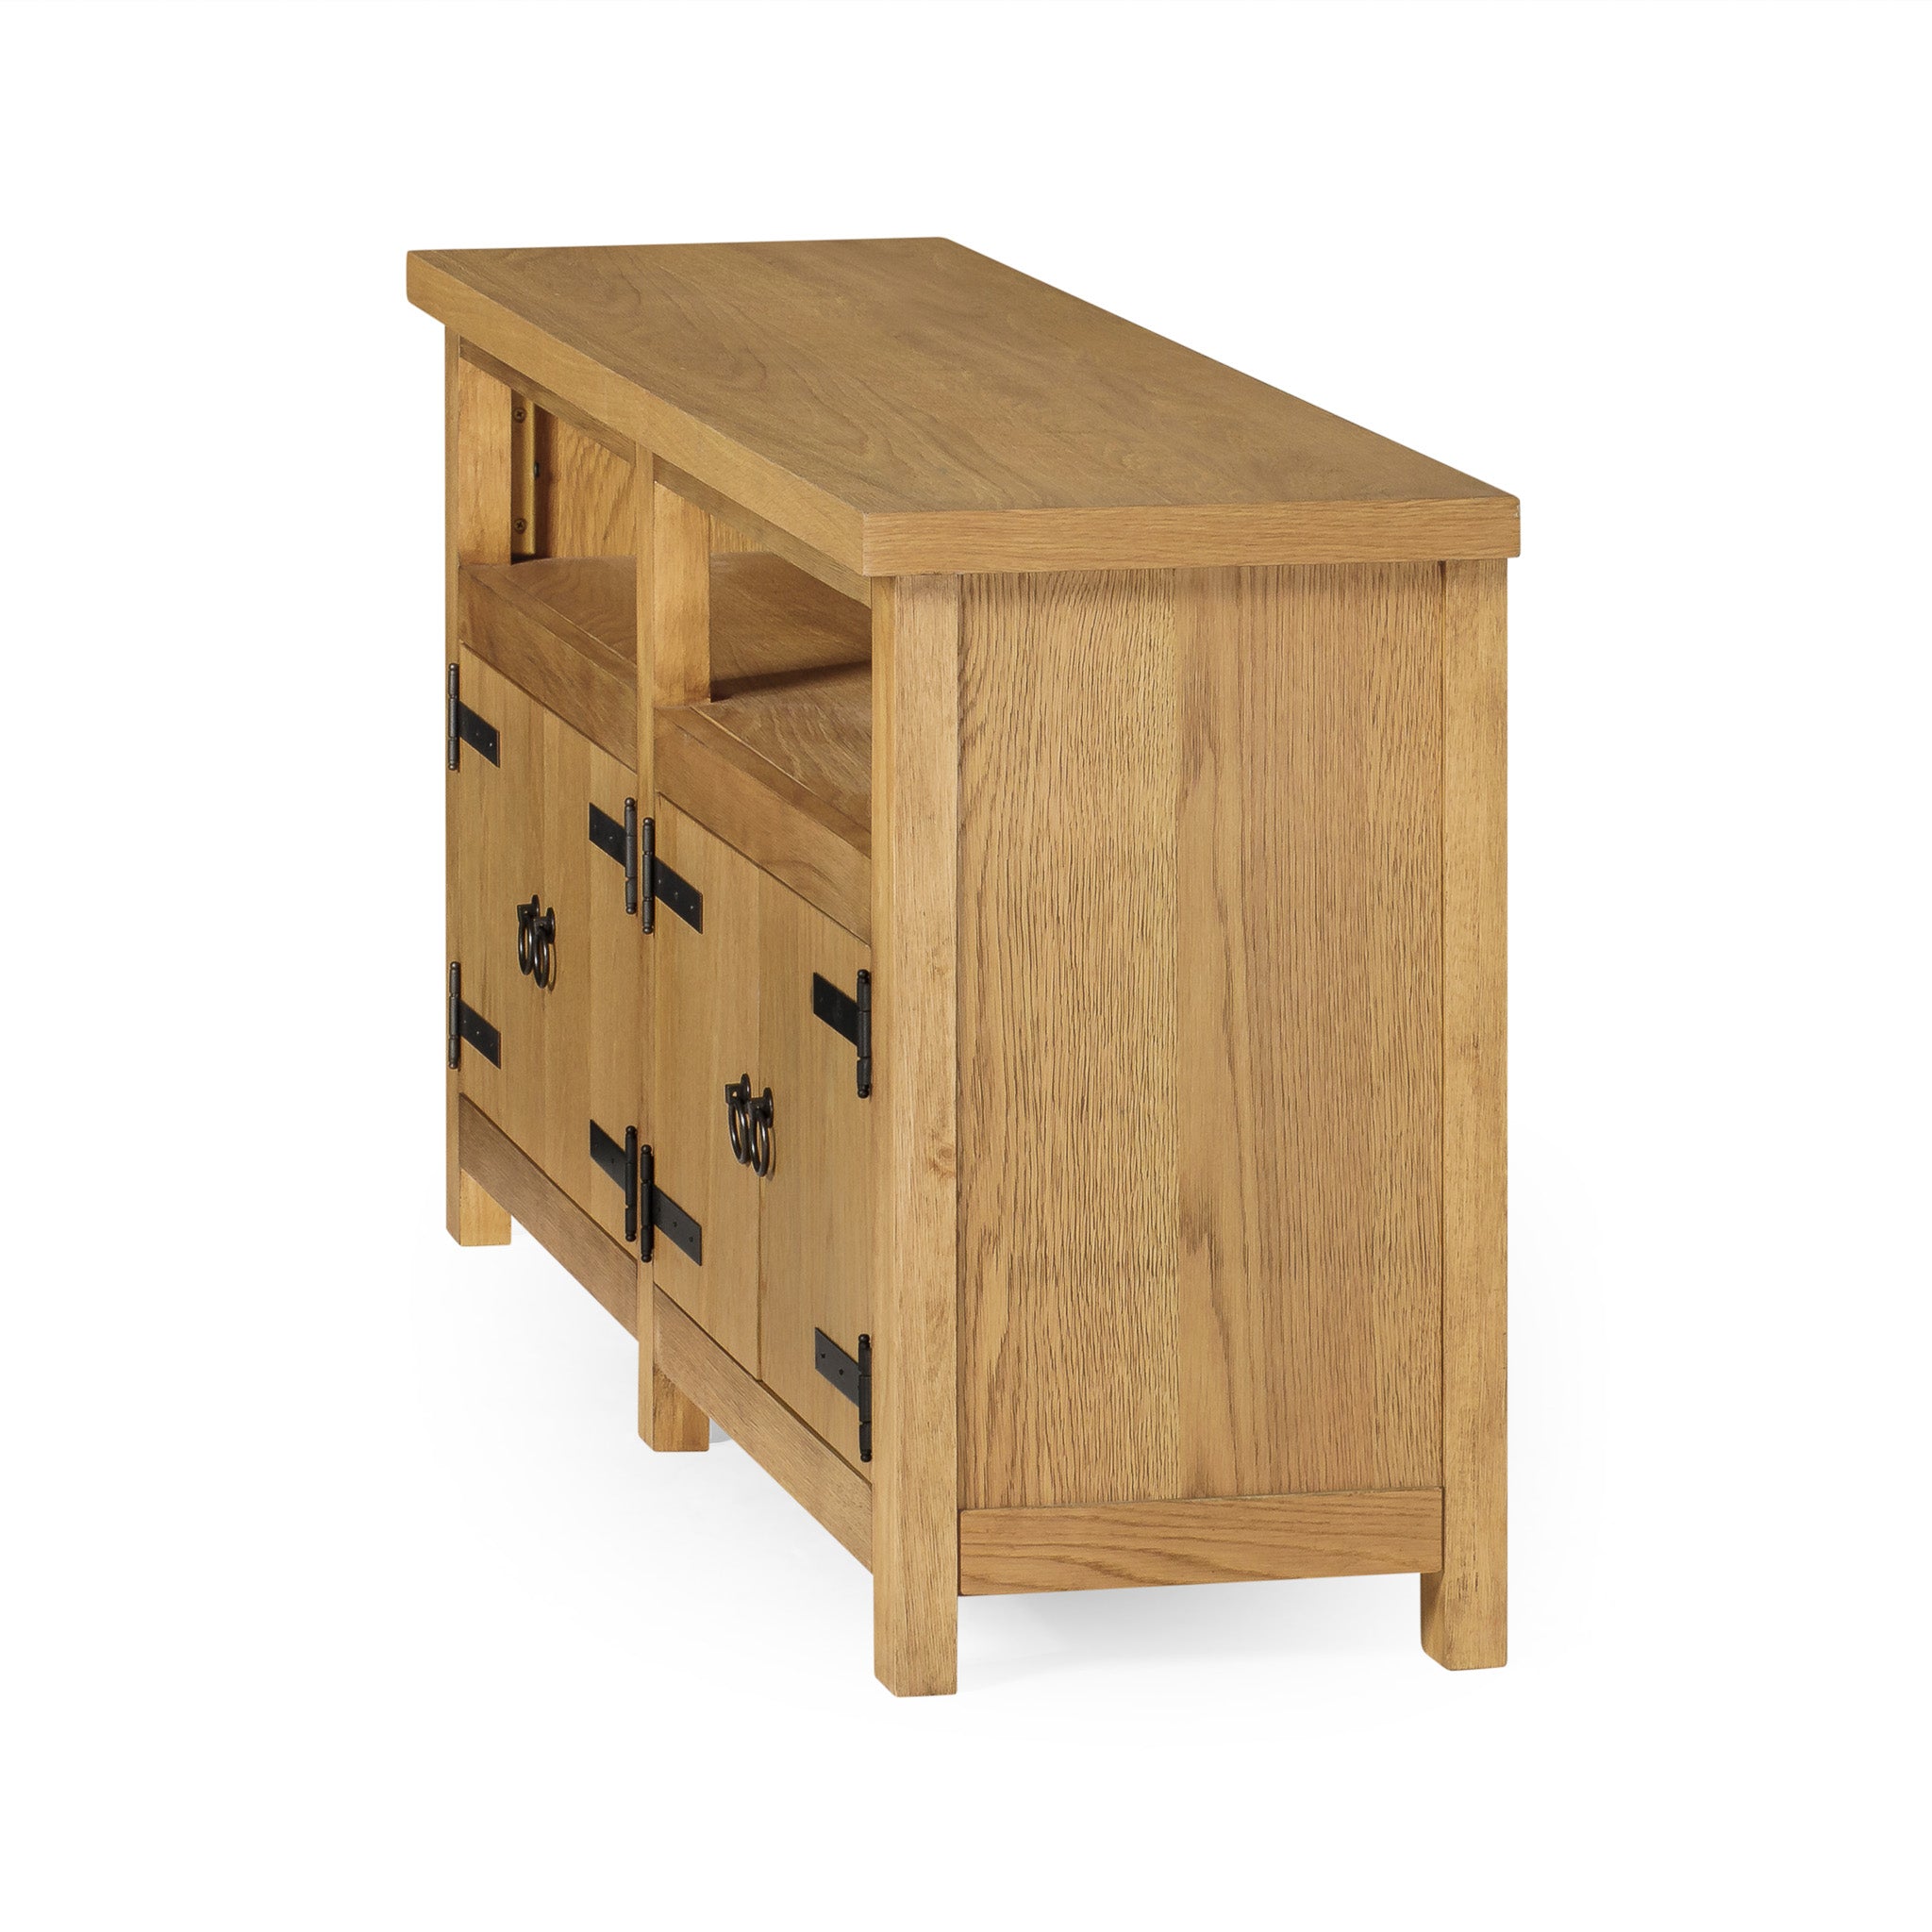 Luca Organic Wooden Media Unit in Weathered Natural Finish in Media Units by Maven Lane